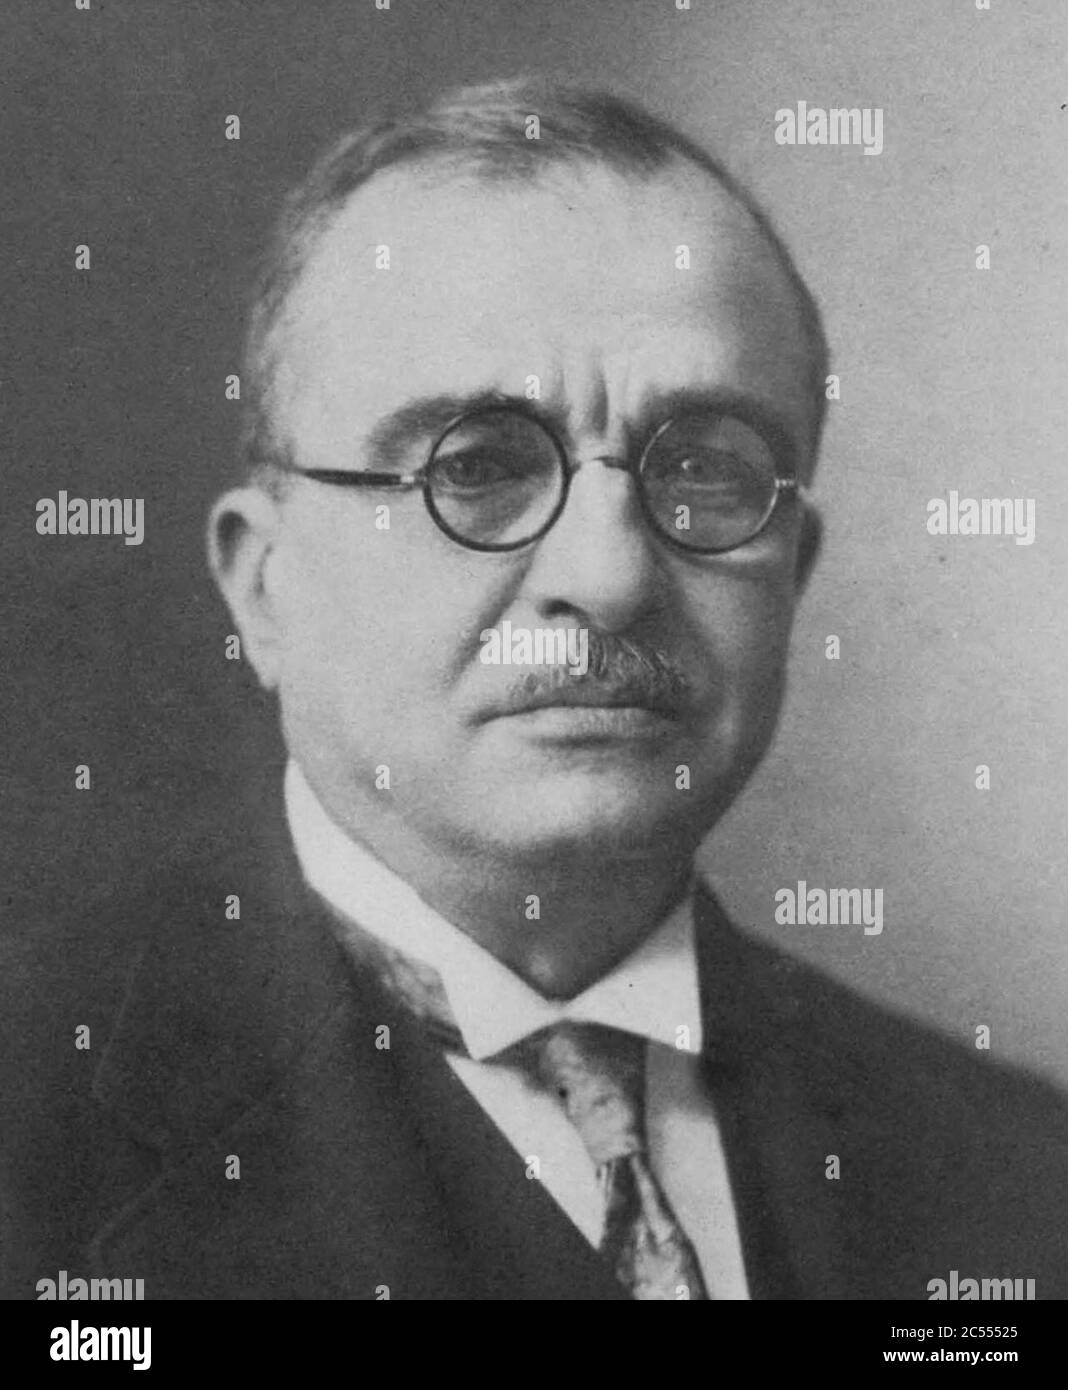 Ioannis Metaxas 1937 (cropped) 2. Stock Photo